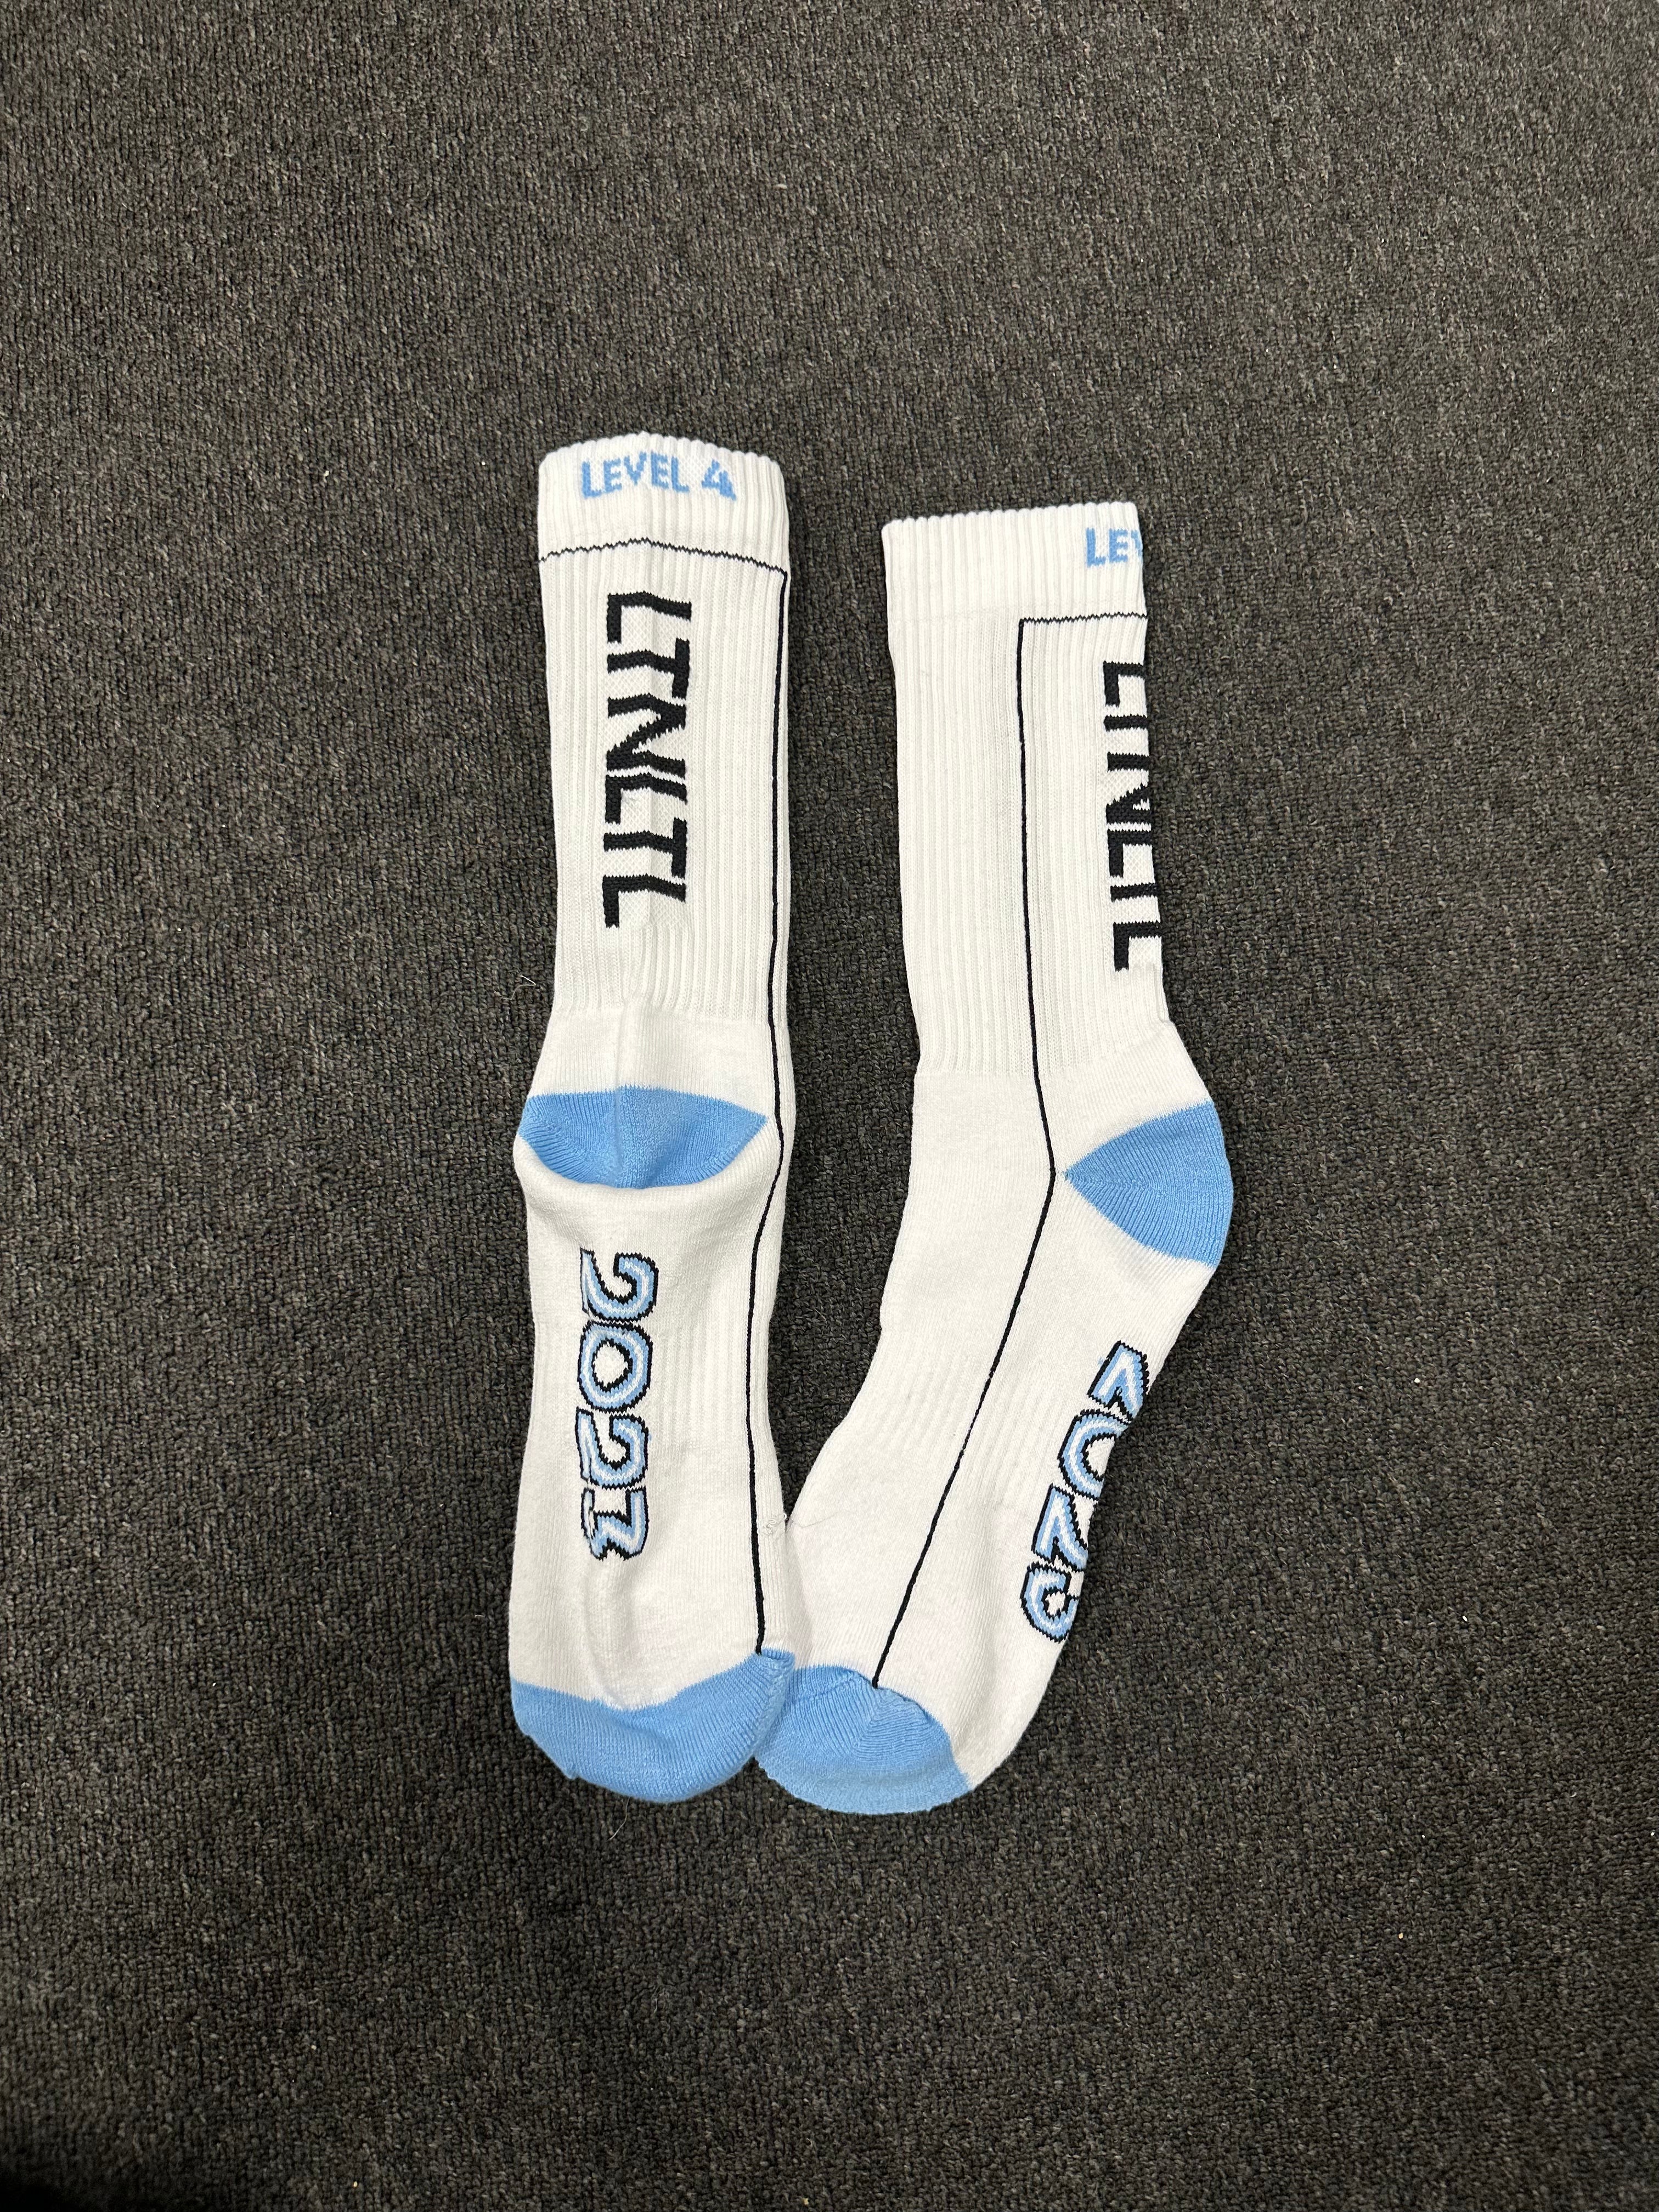 2023 Level socks - ONE FREE PAIR WITH EVERY PURCHASE OVER $30